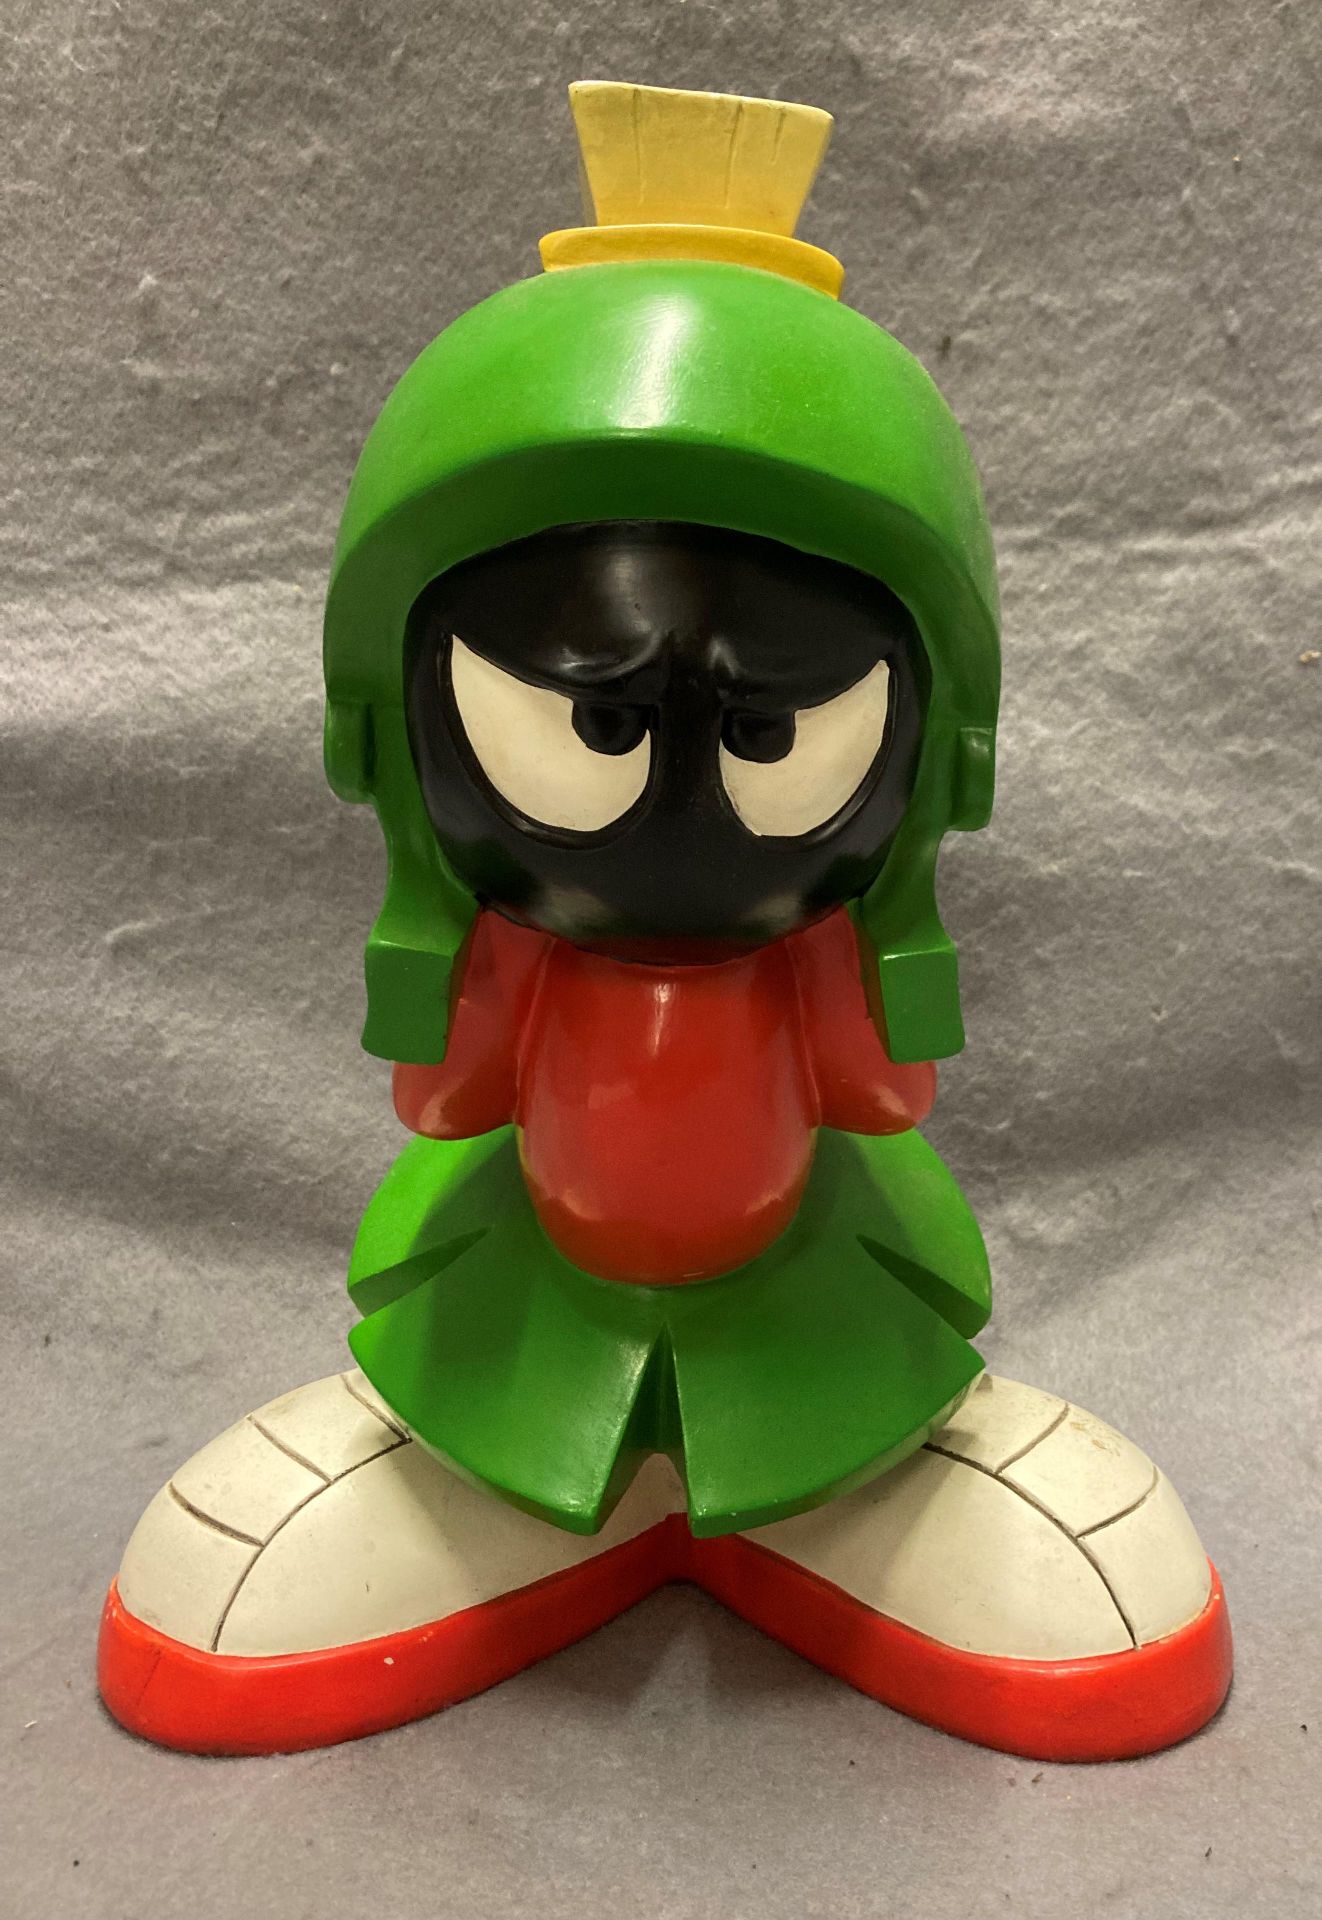 Warner Brothers model of Marvin the Martian,